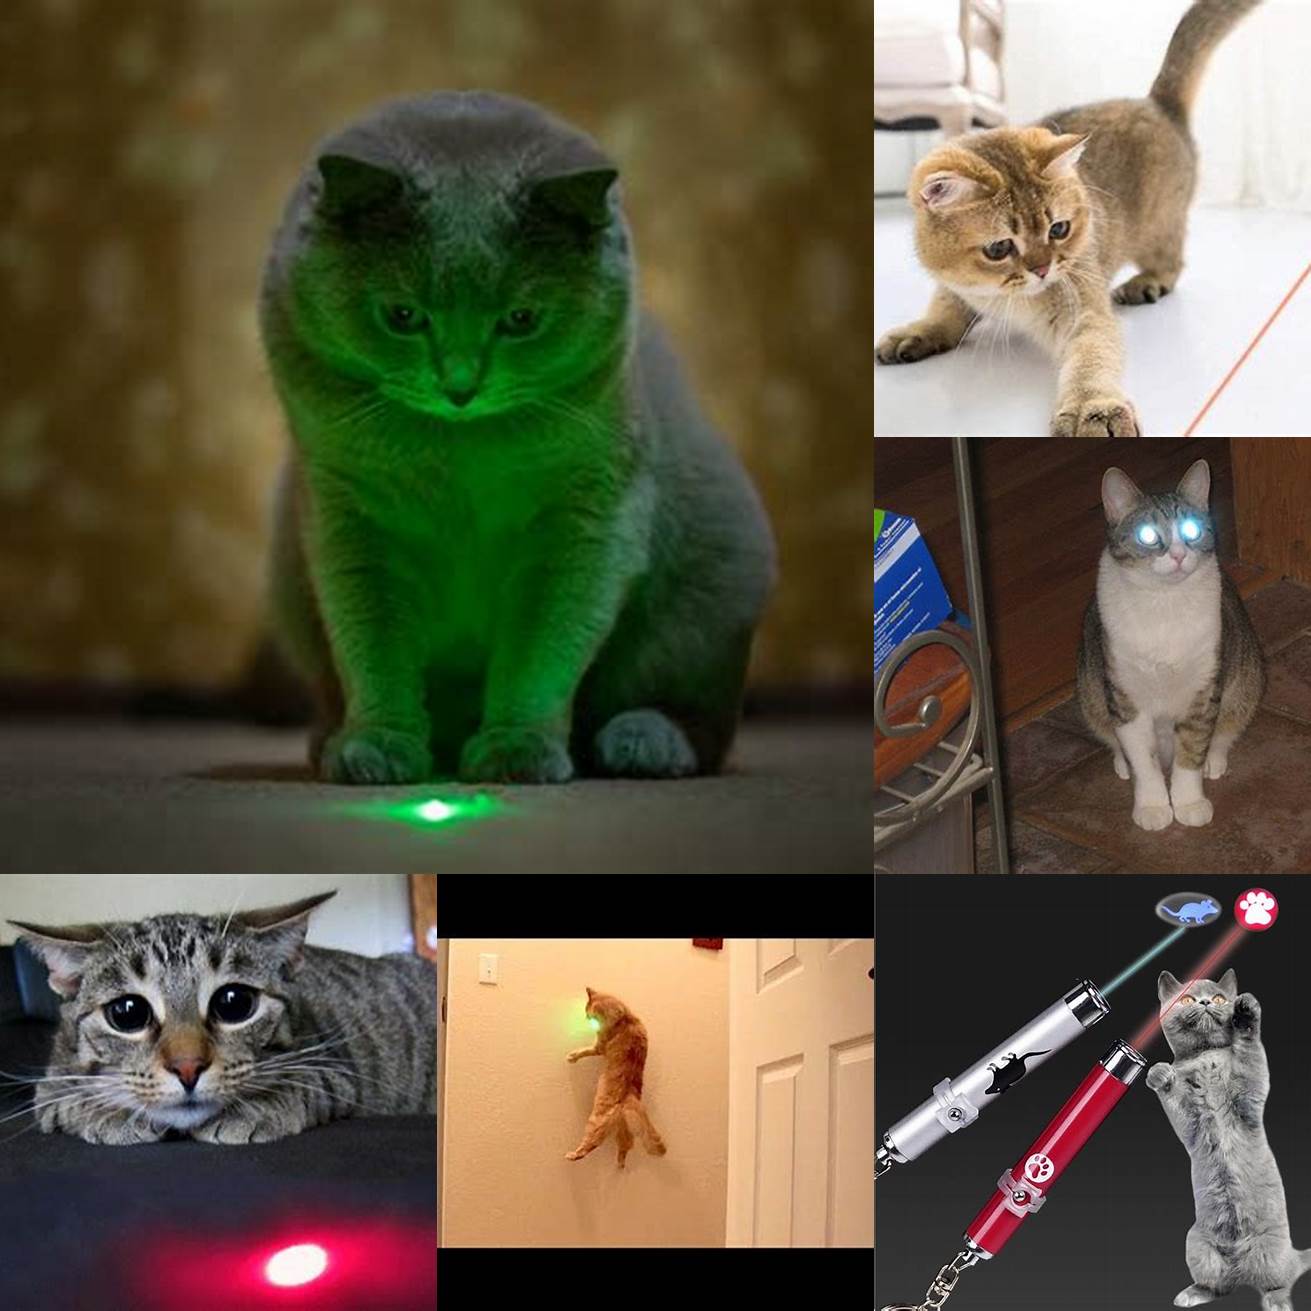 Cat staring at a green laser pointer